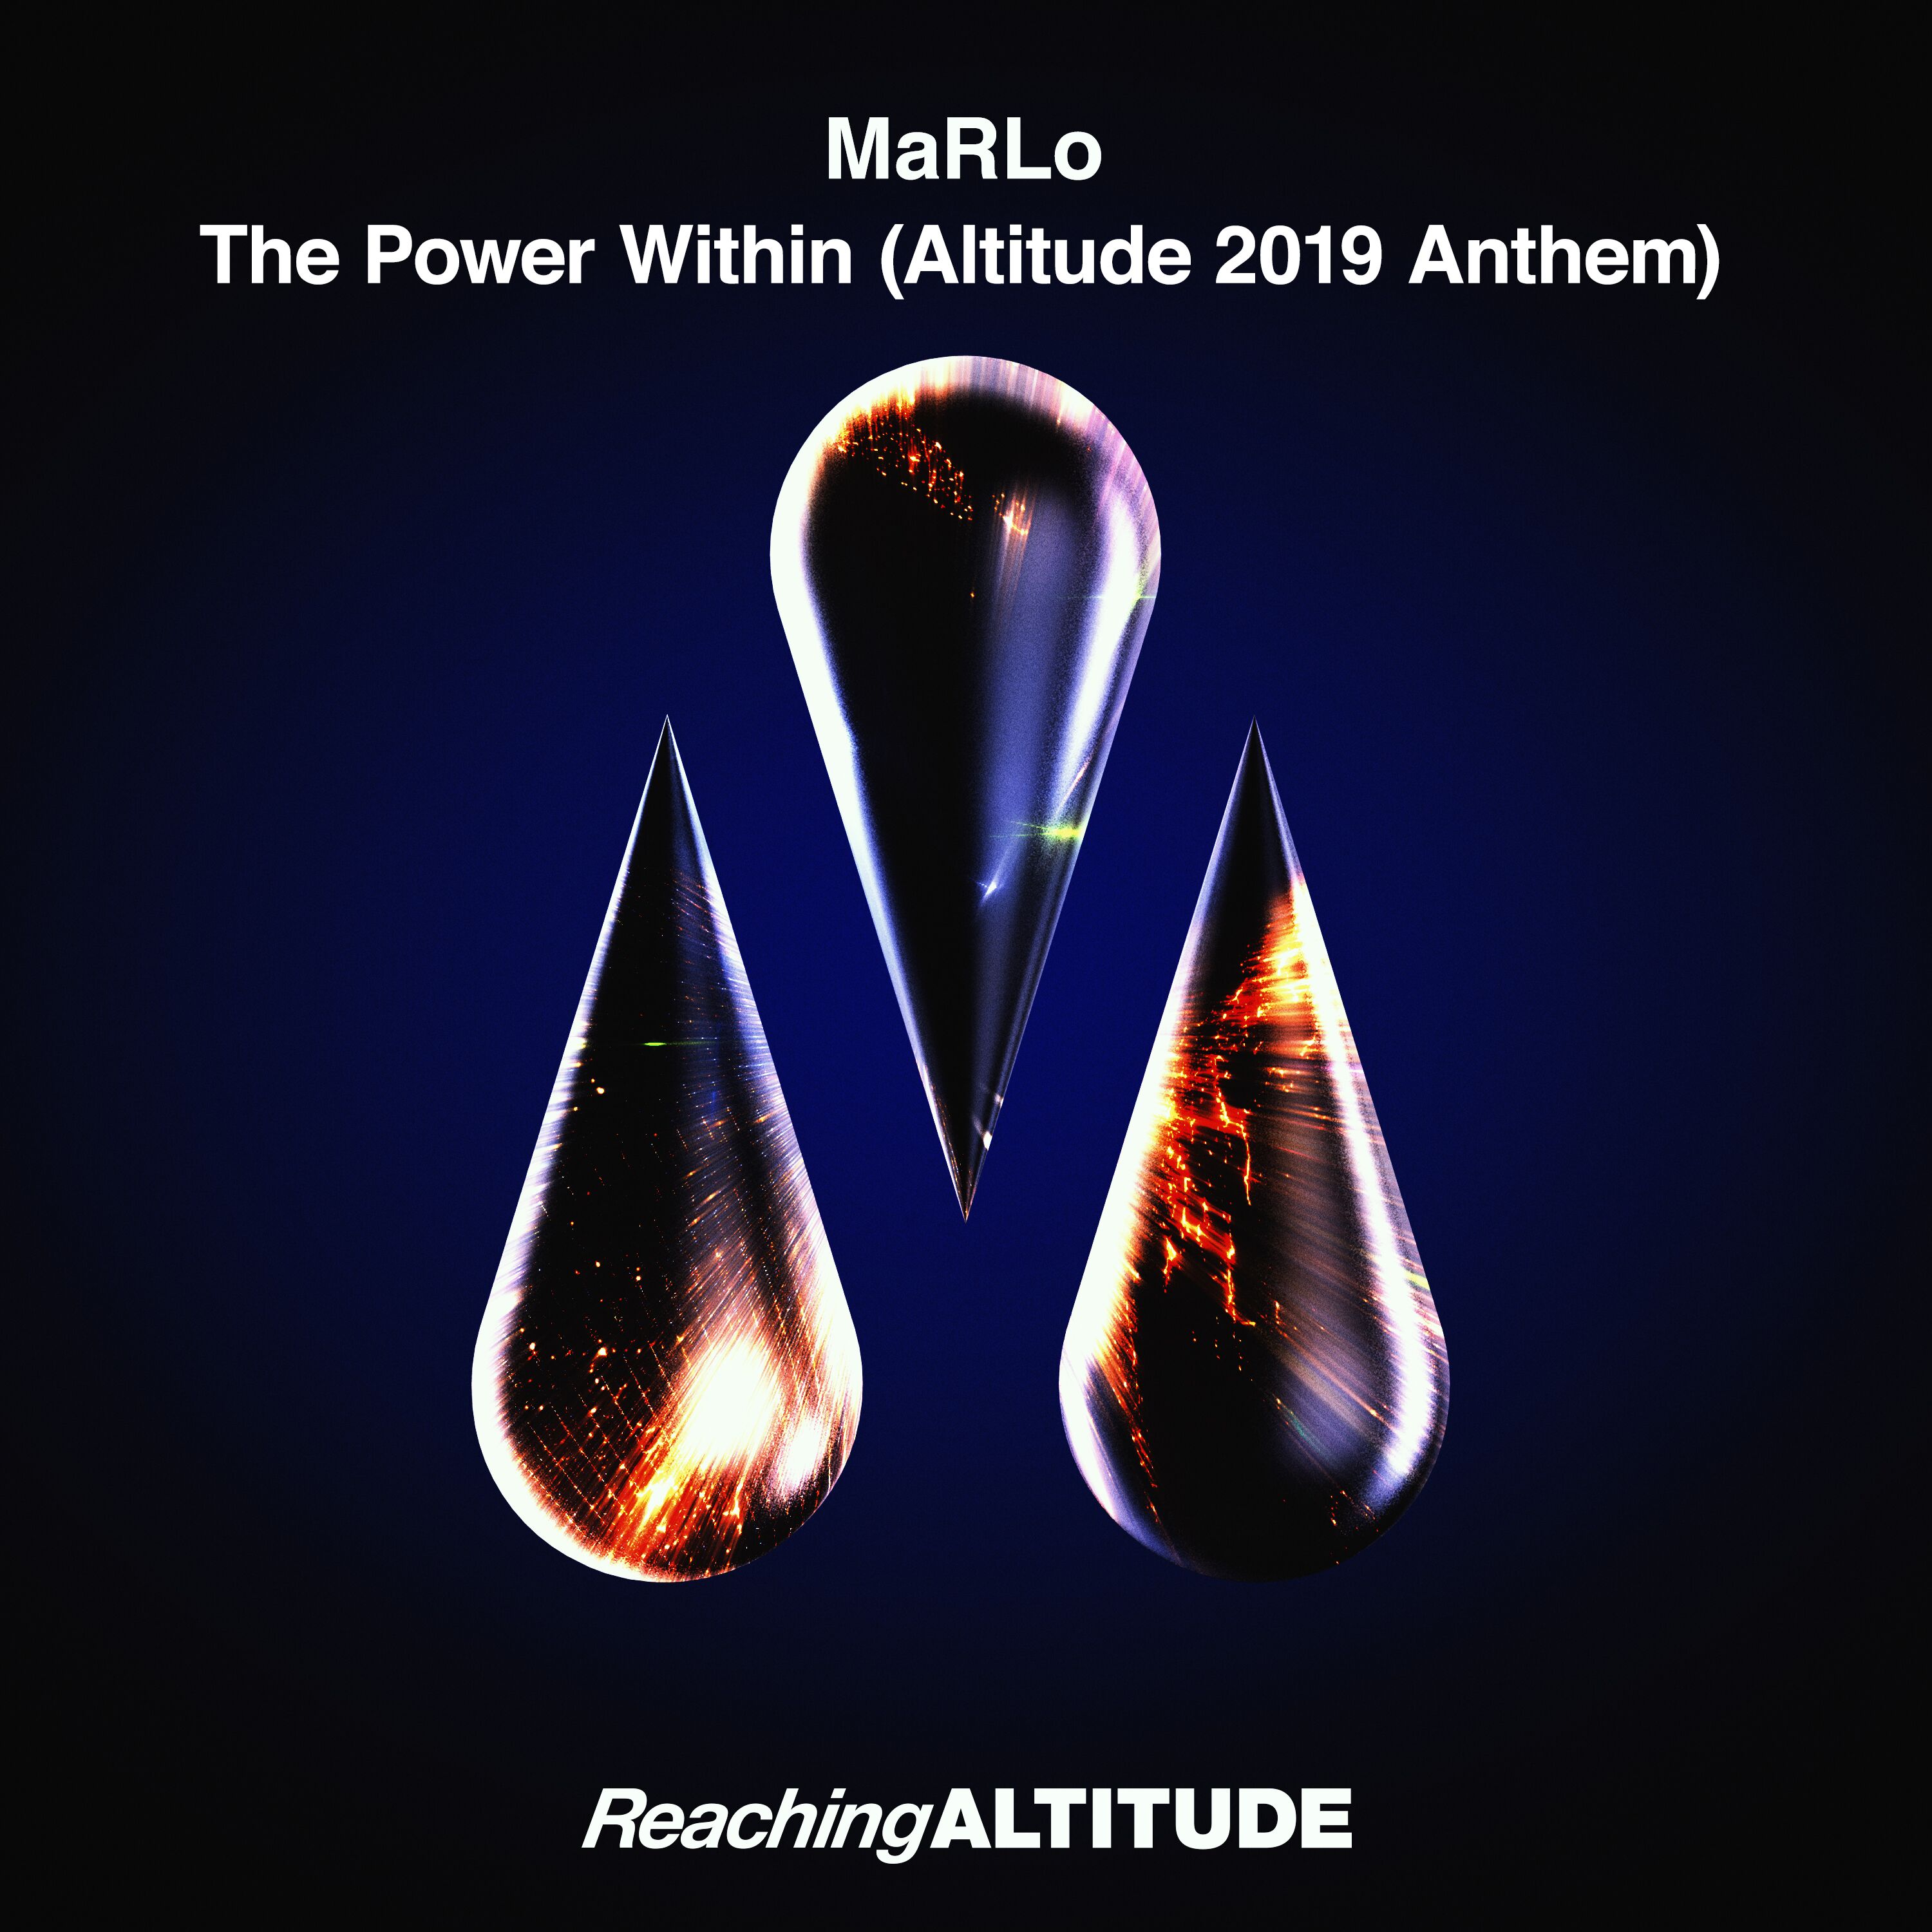 MaRLo presents The Power Within (Altitude 2019 Anthem) on Armada Music